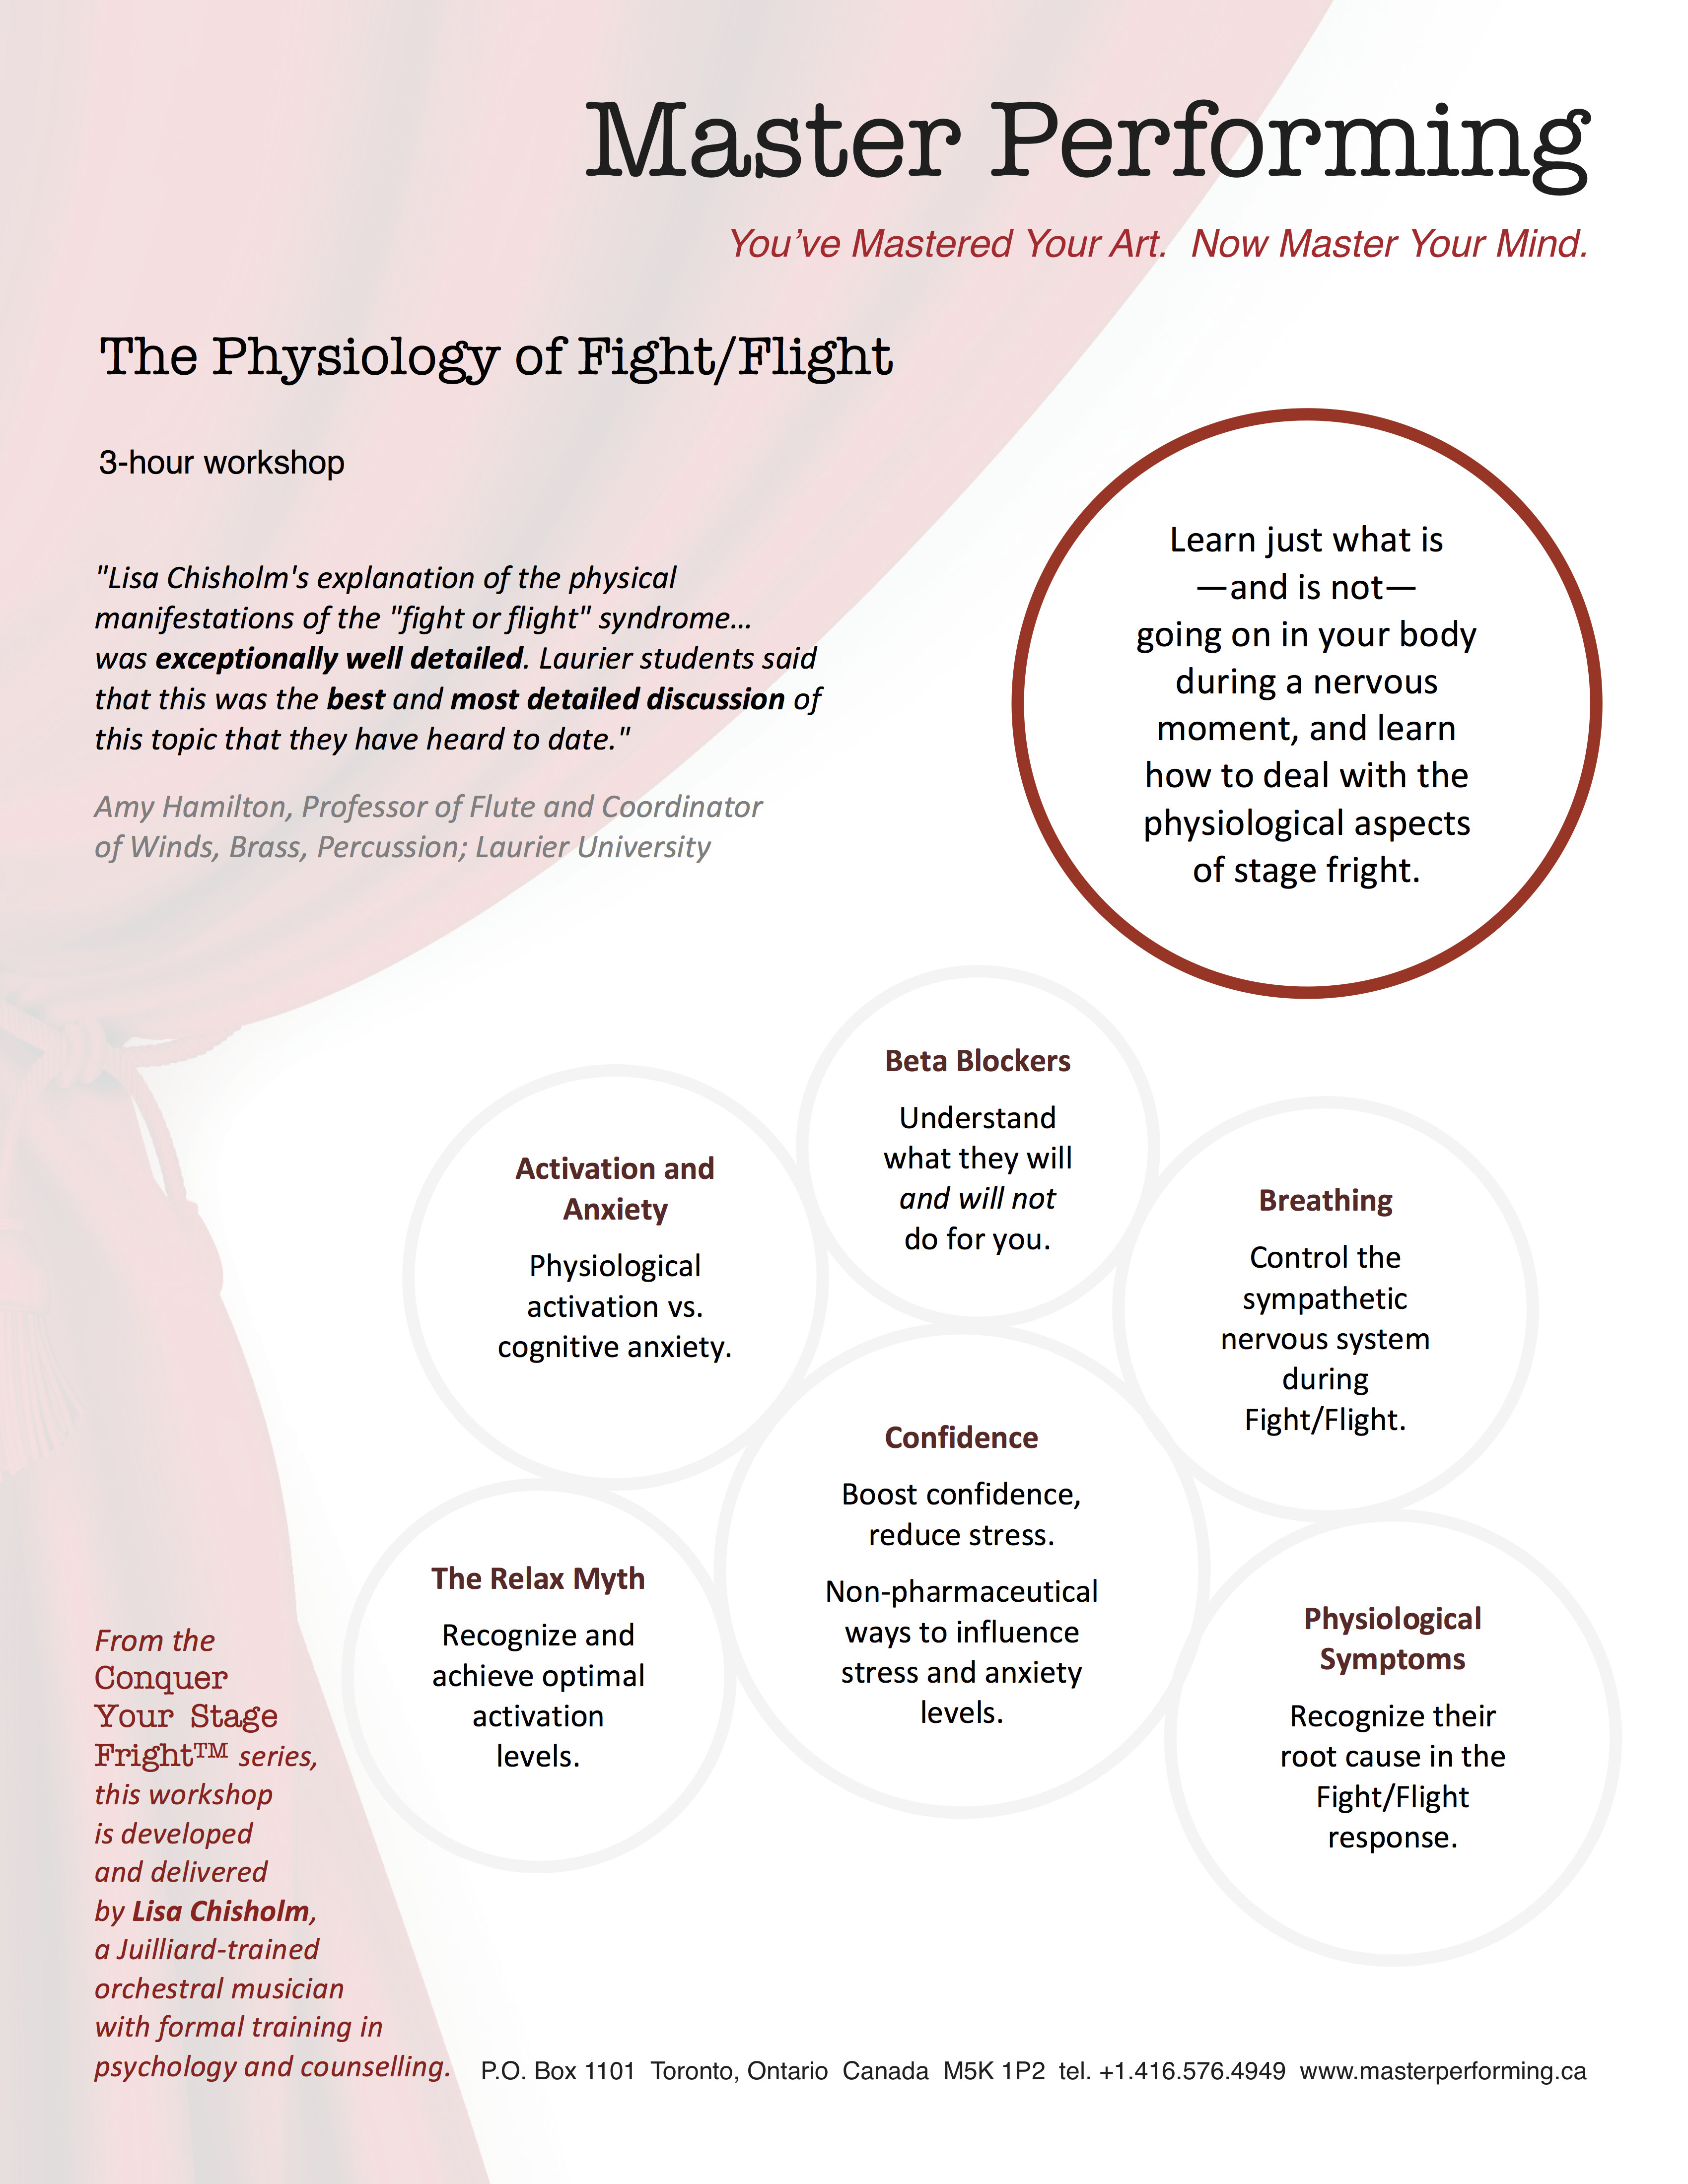 master-performing-physiology-of-fight-flight